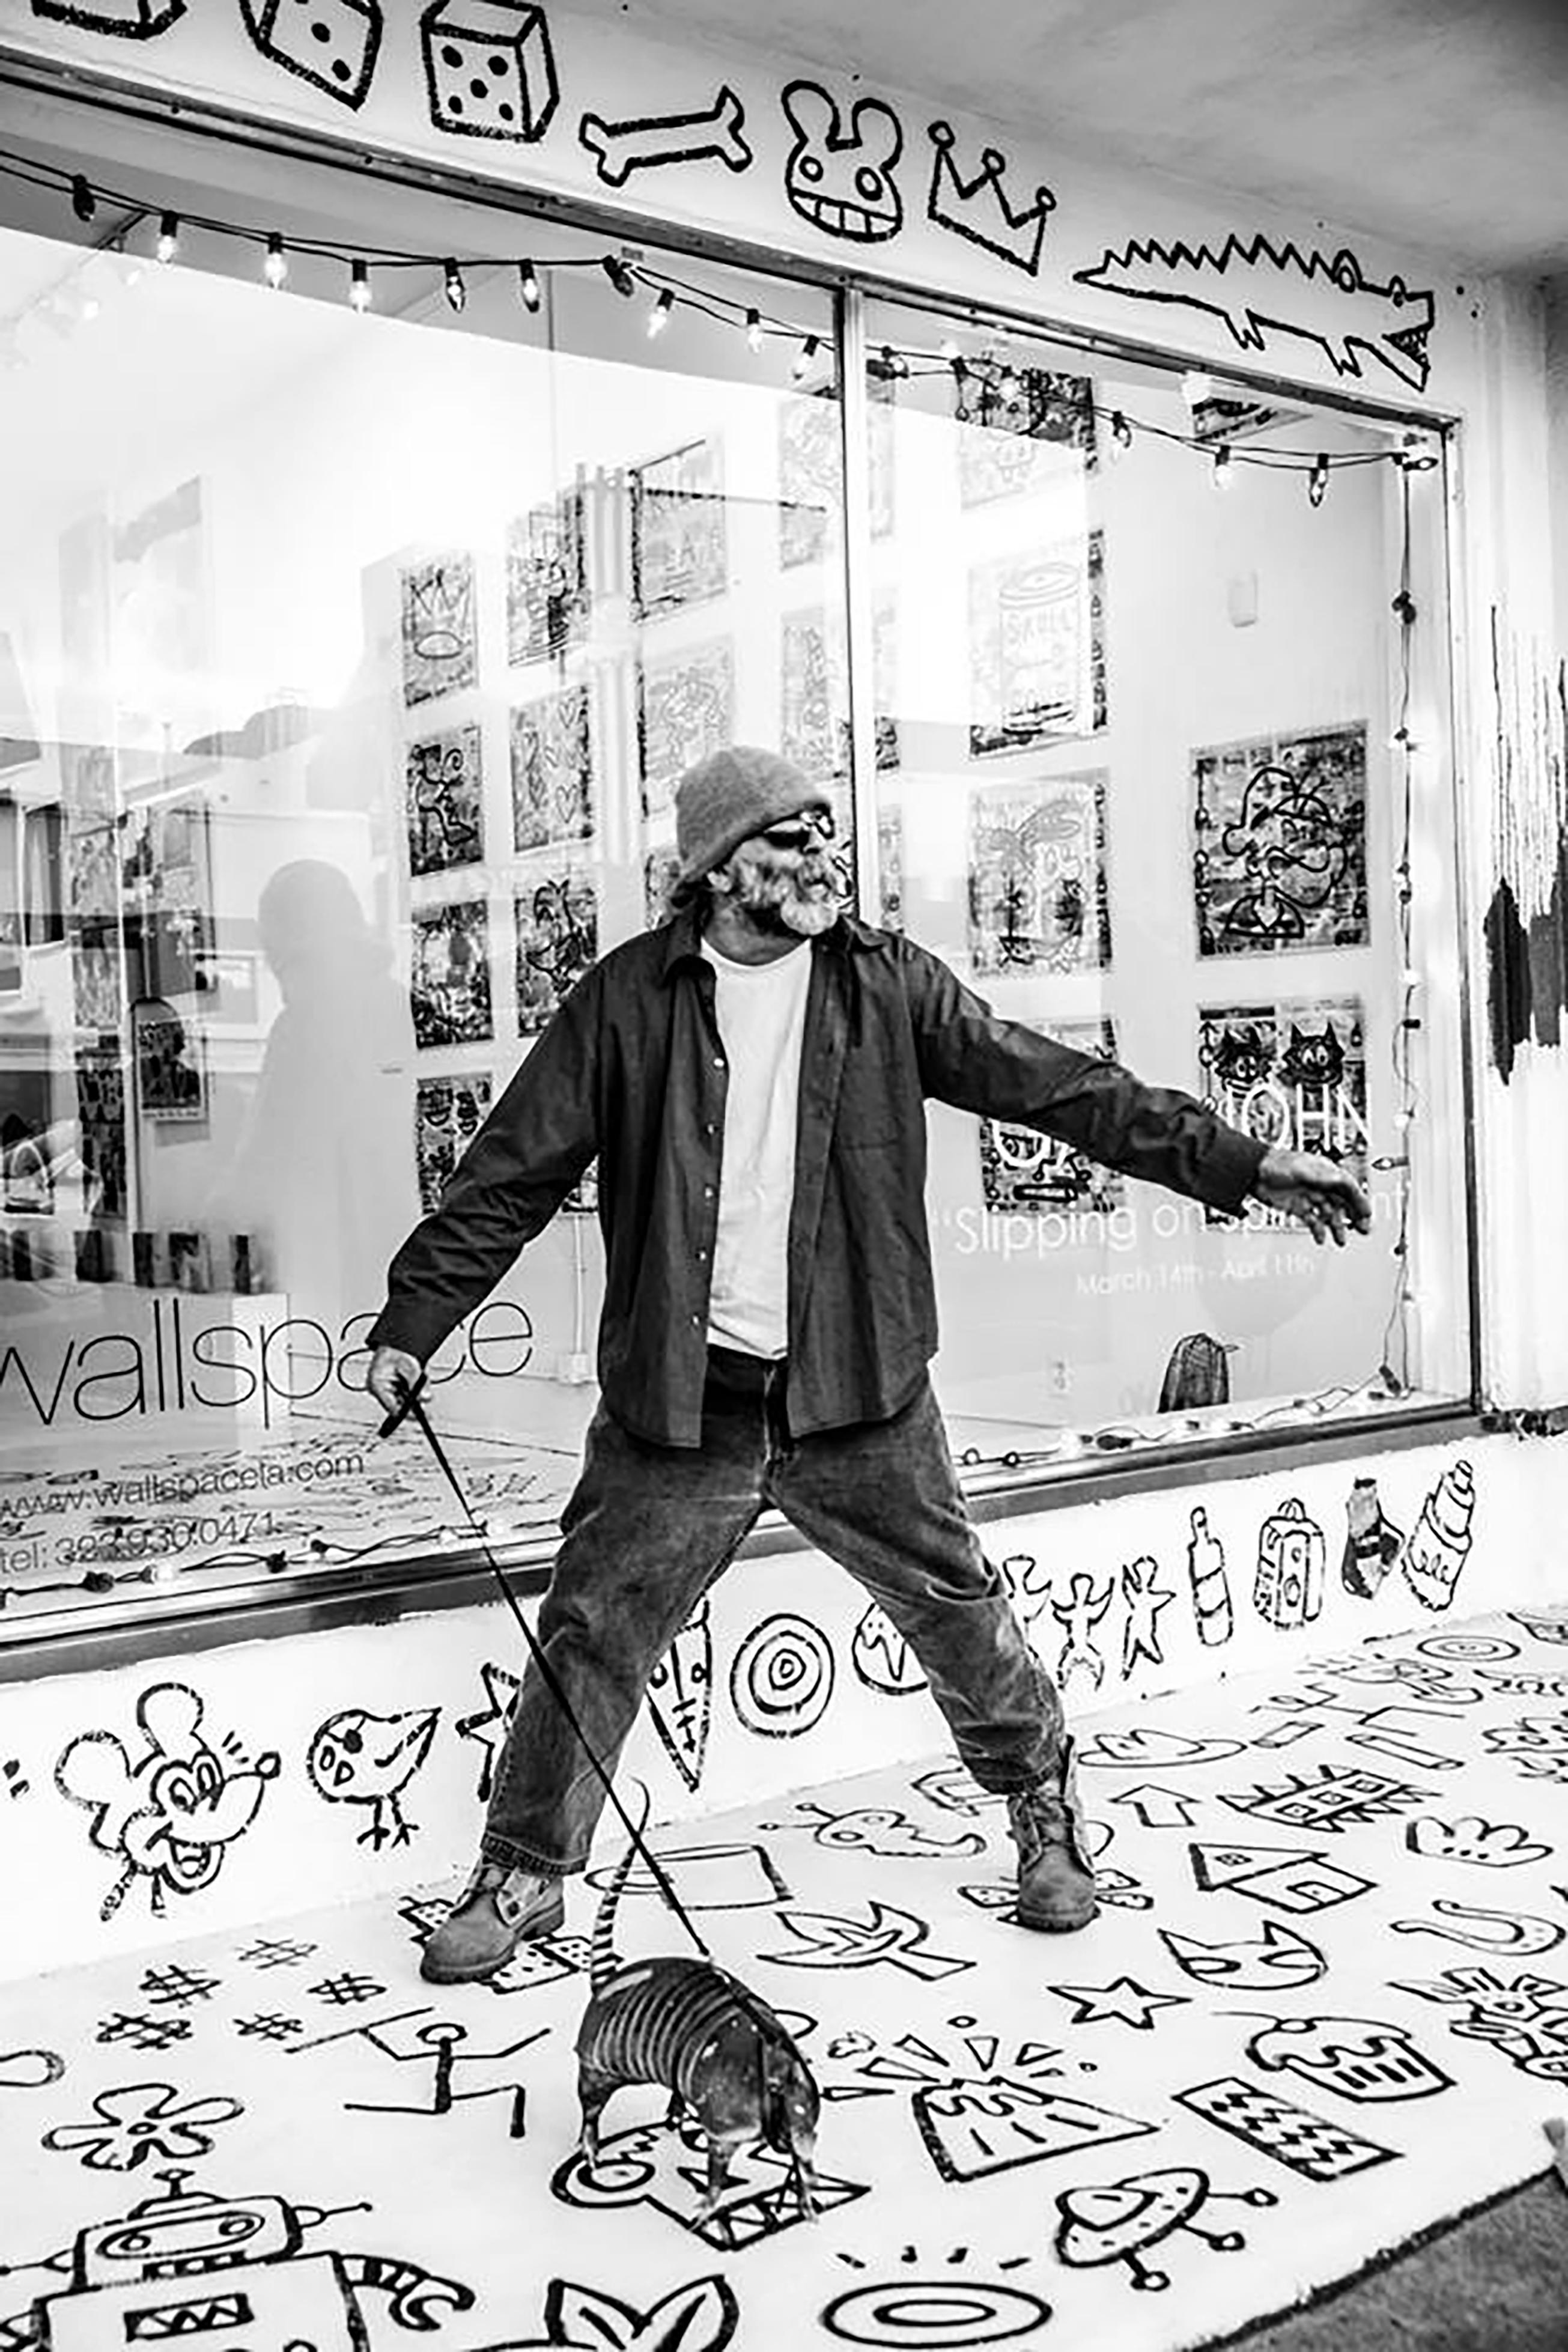 Gary John has been a street artist since 1985, originally from Seattle Washington, then moving to Venice Beach selling his art on the boardwalk for 10 years before exploding onto the world art market. Gary has now shown at art Basel, Miami, New York